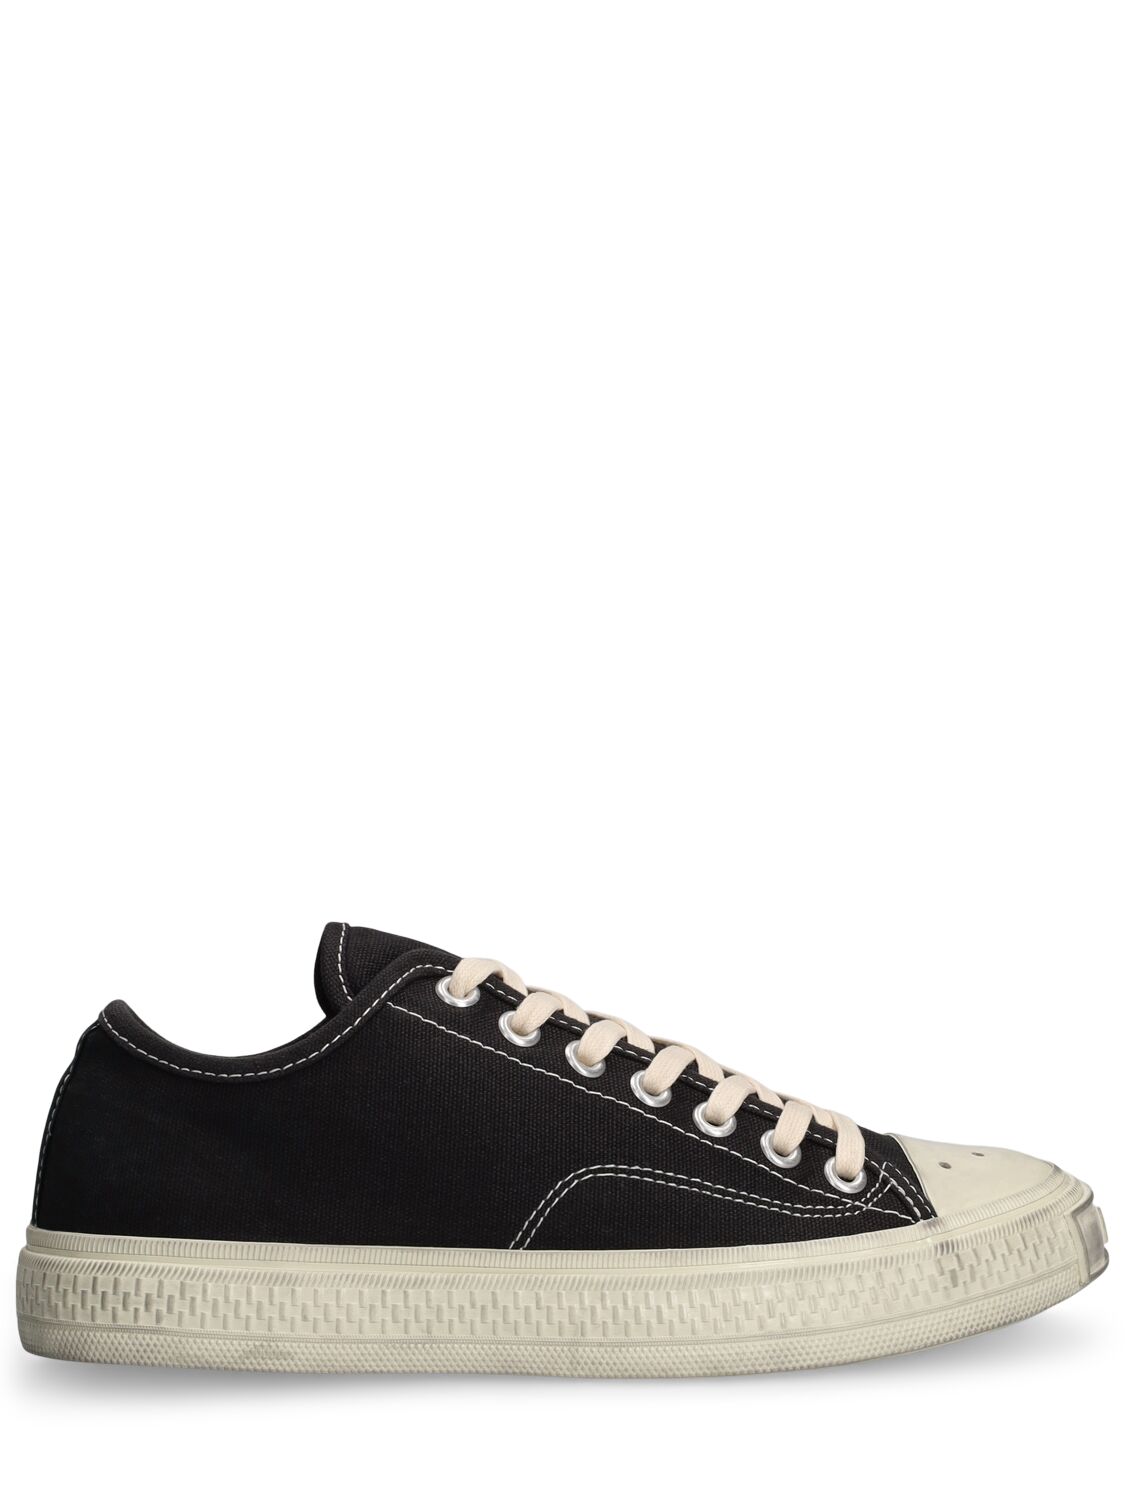 Image of Ballow Cotton Low Top Sneakers